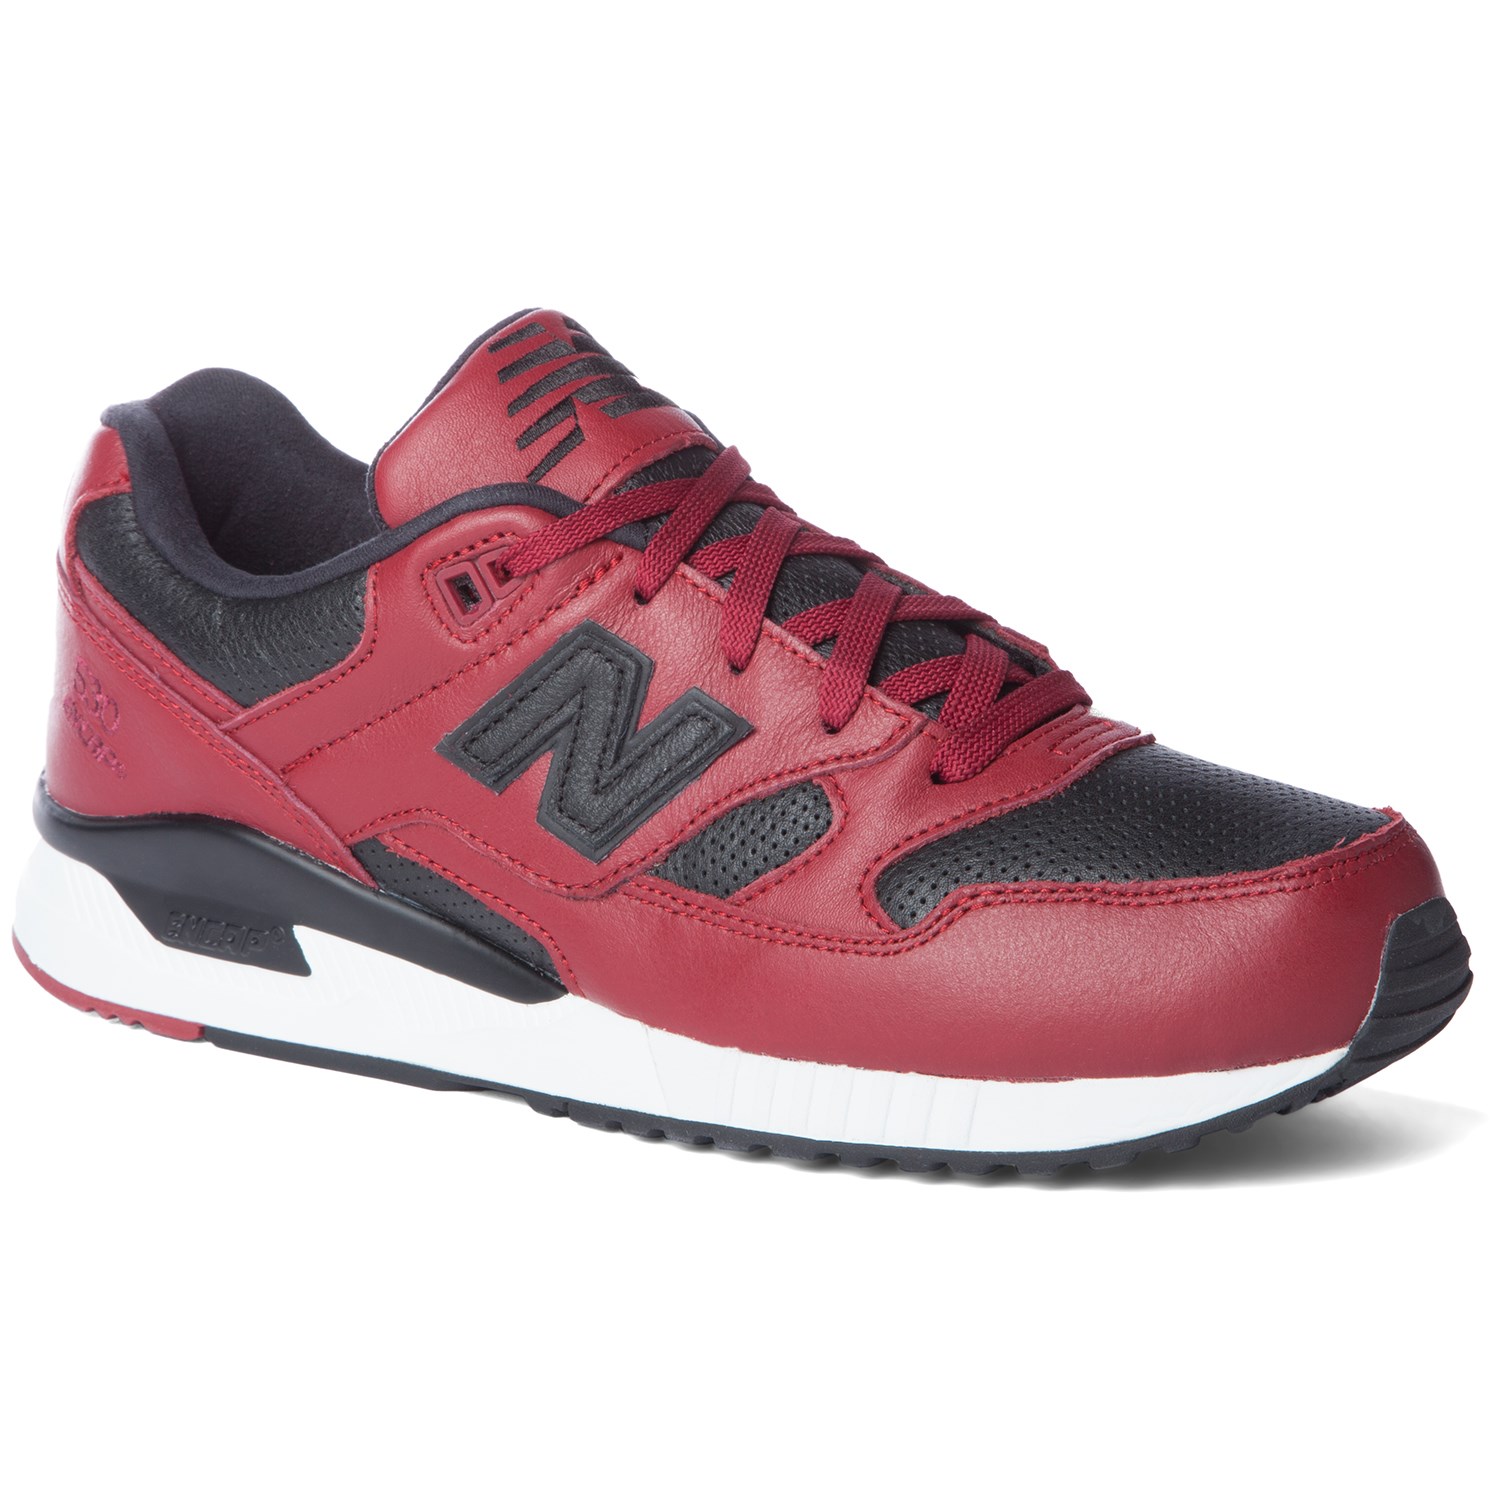 new balance leather shoes